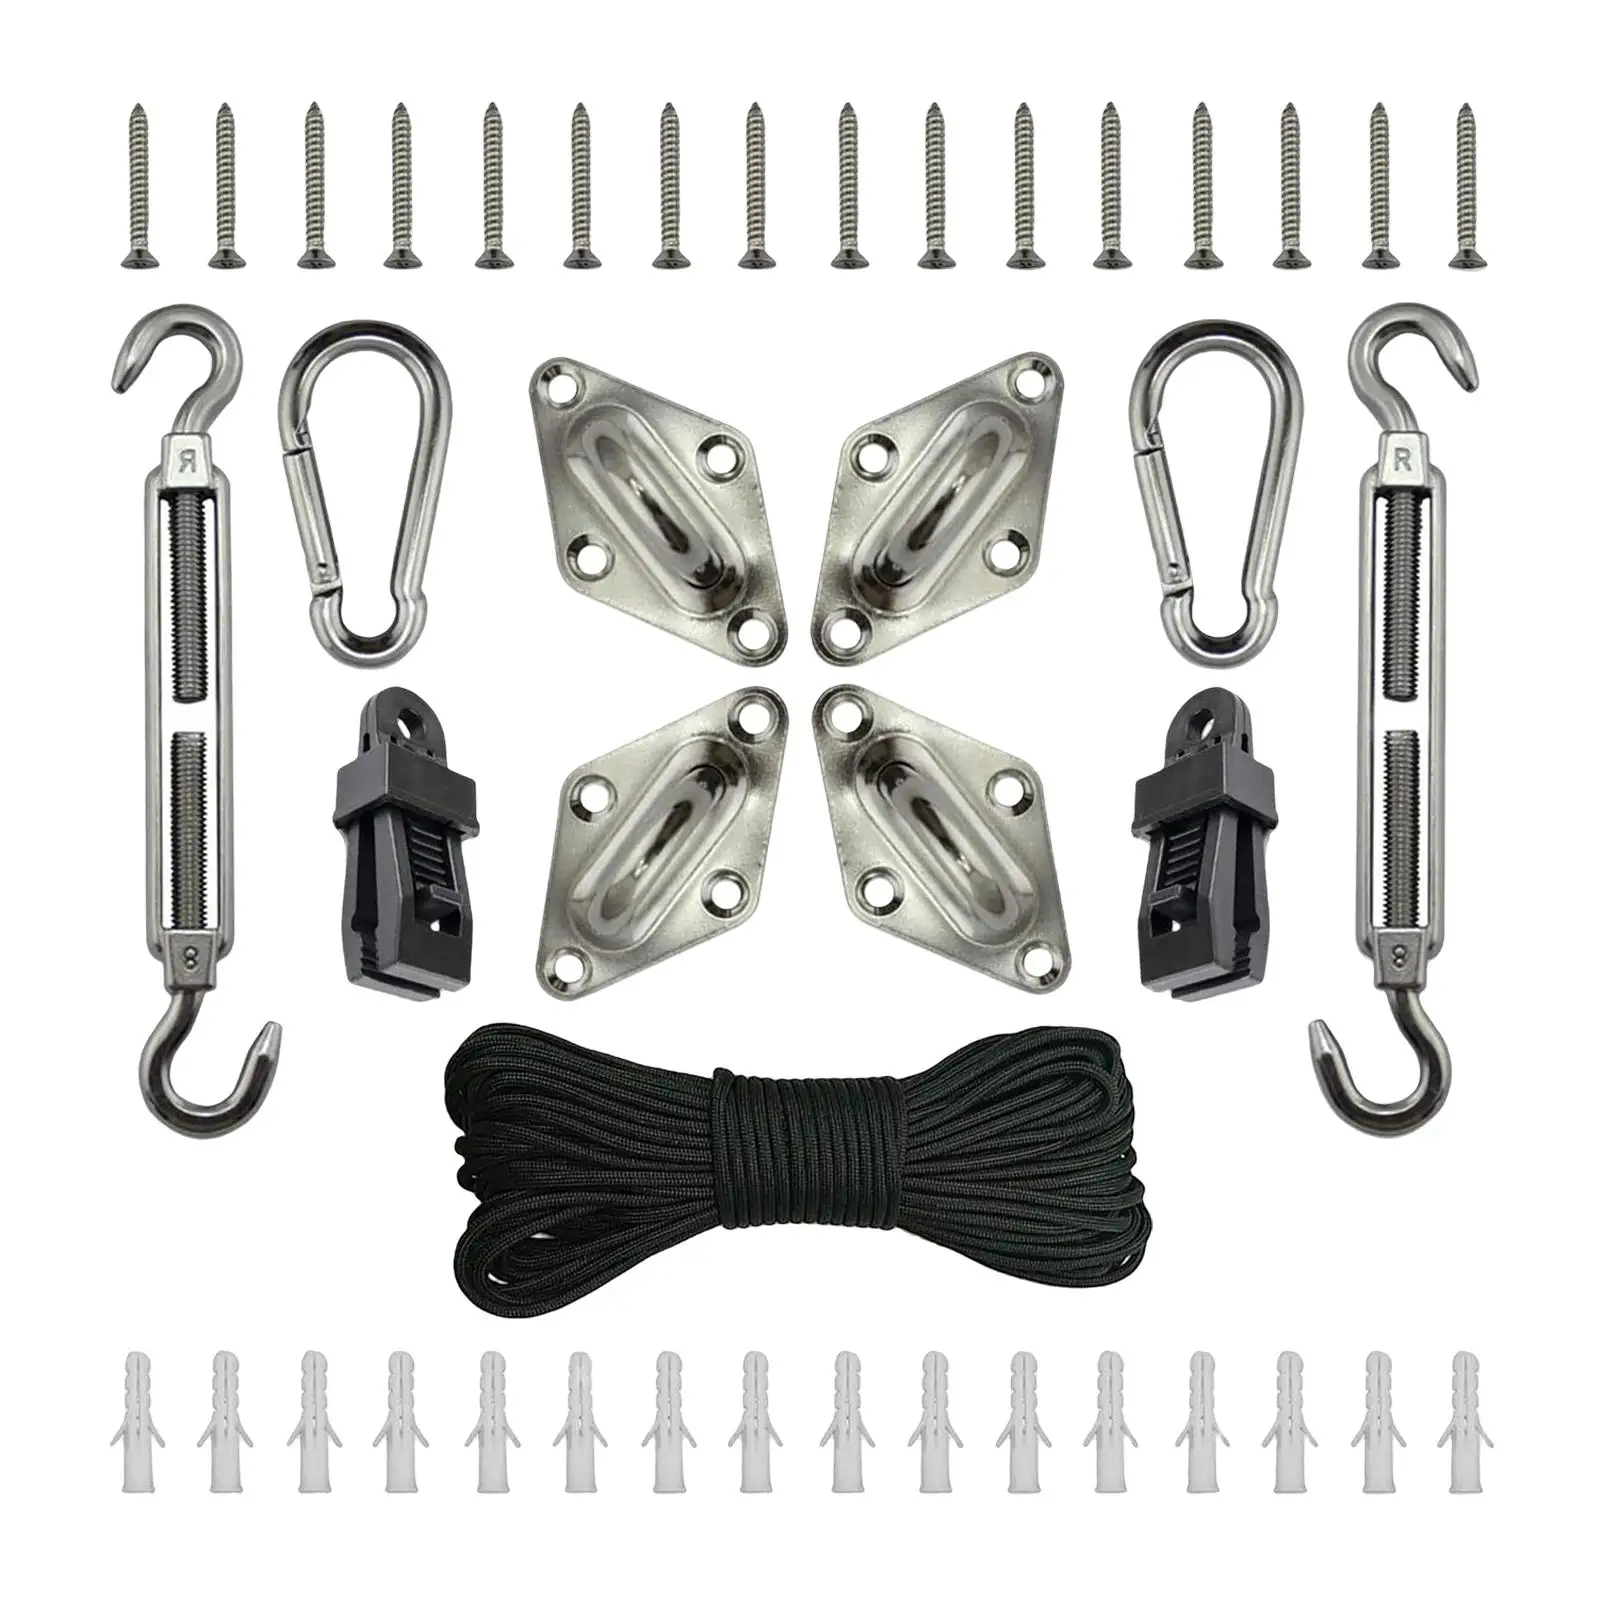 shade sail Hardware Kit 43 Pieces for Garden, Trees, Wall, Porch Metal Material Durable Sturdy Outdoor with 10M Rope